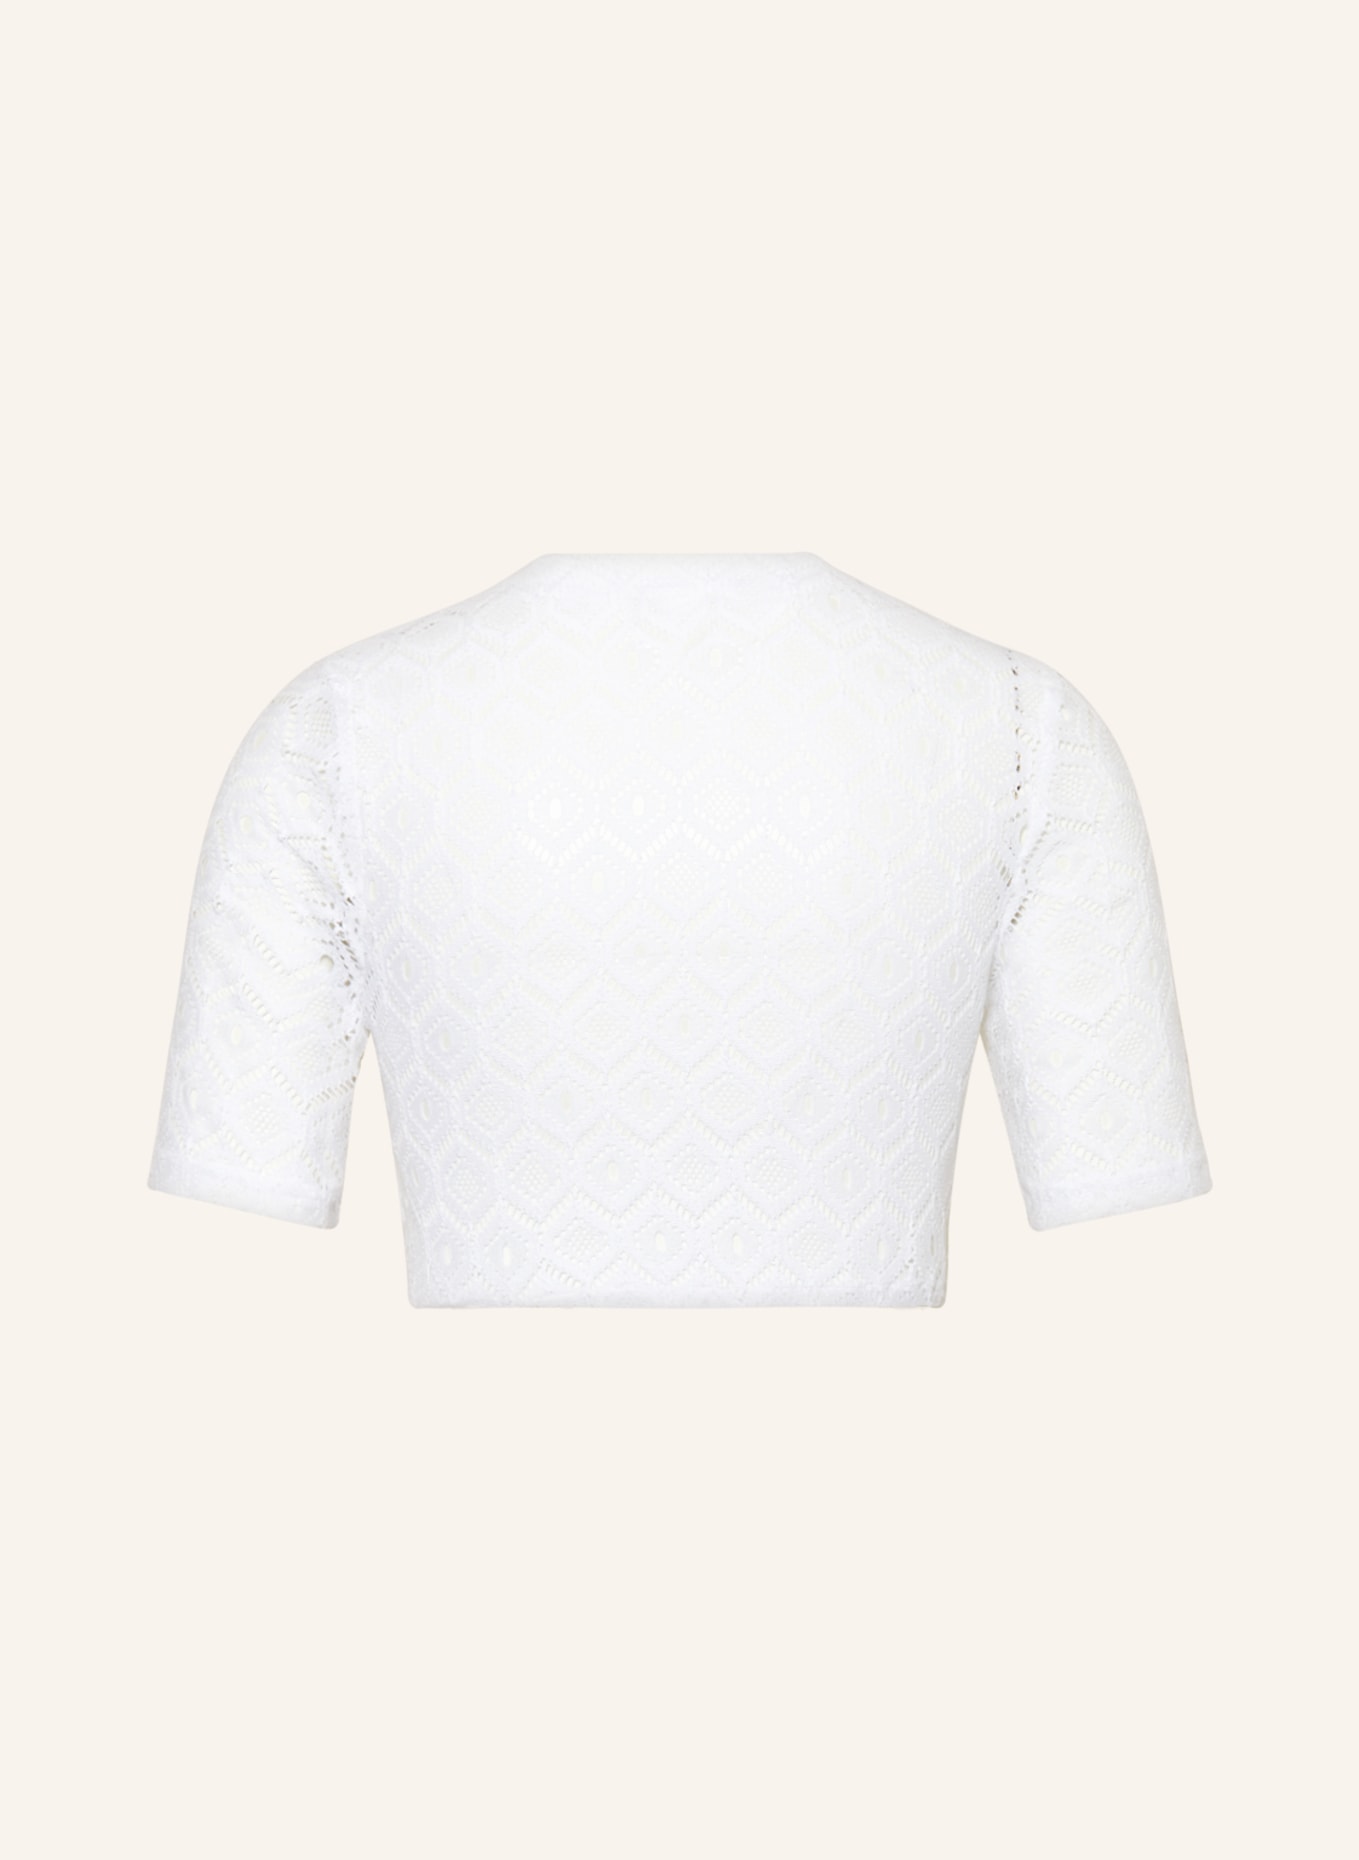 WALDORFF Dirndl blouse made of lace, Color: WHITE (Image 2)